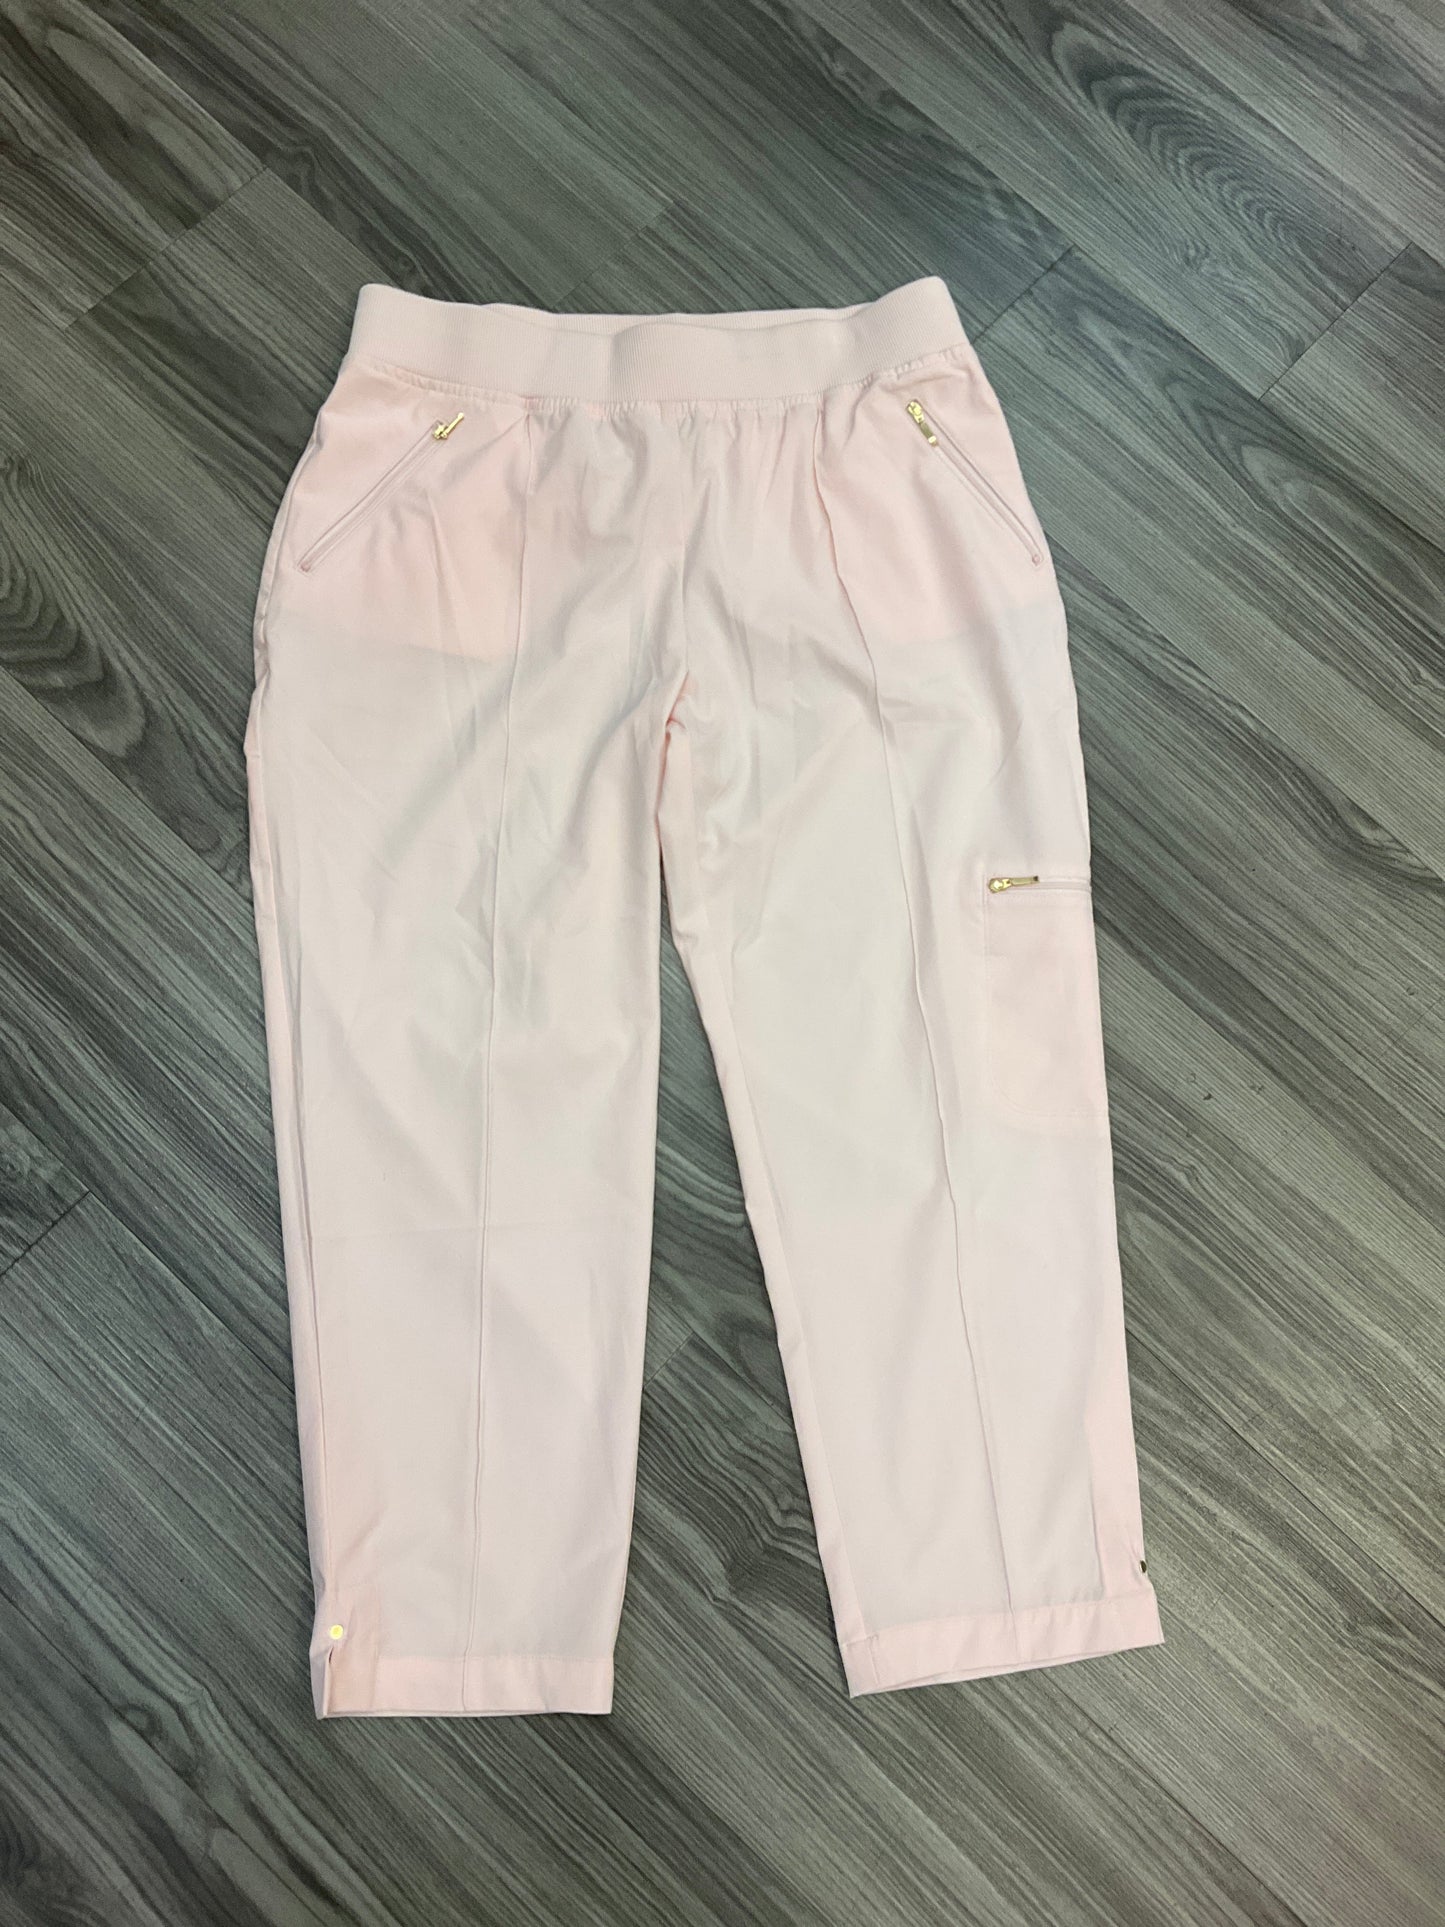 Pink Pants Cropped Chicos, Size 8